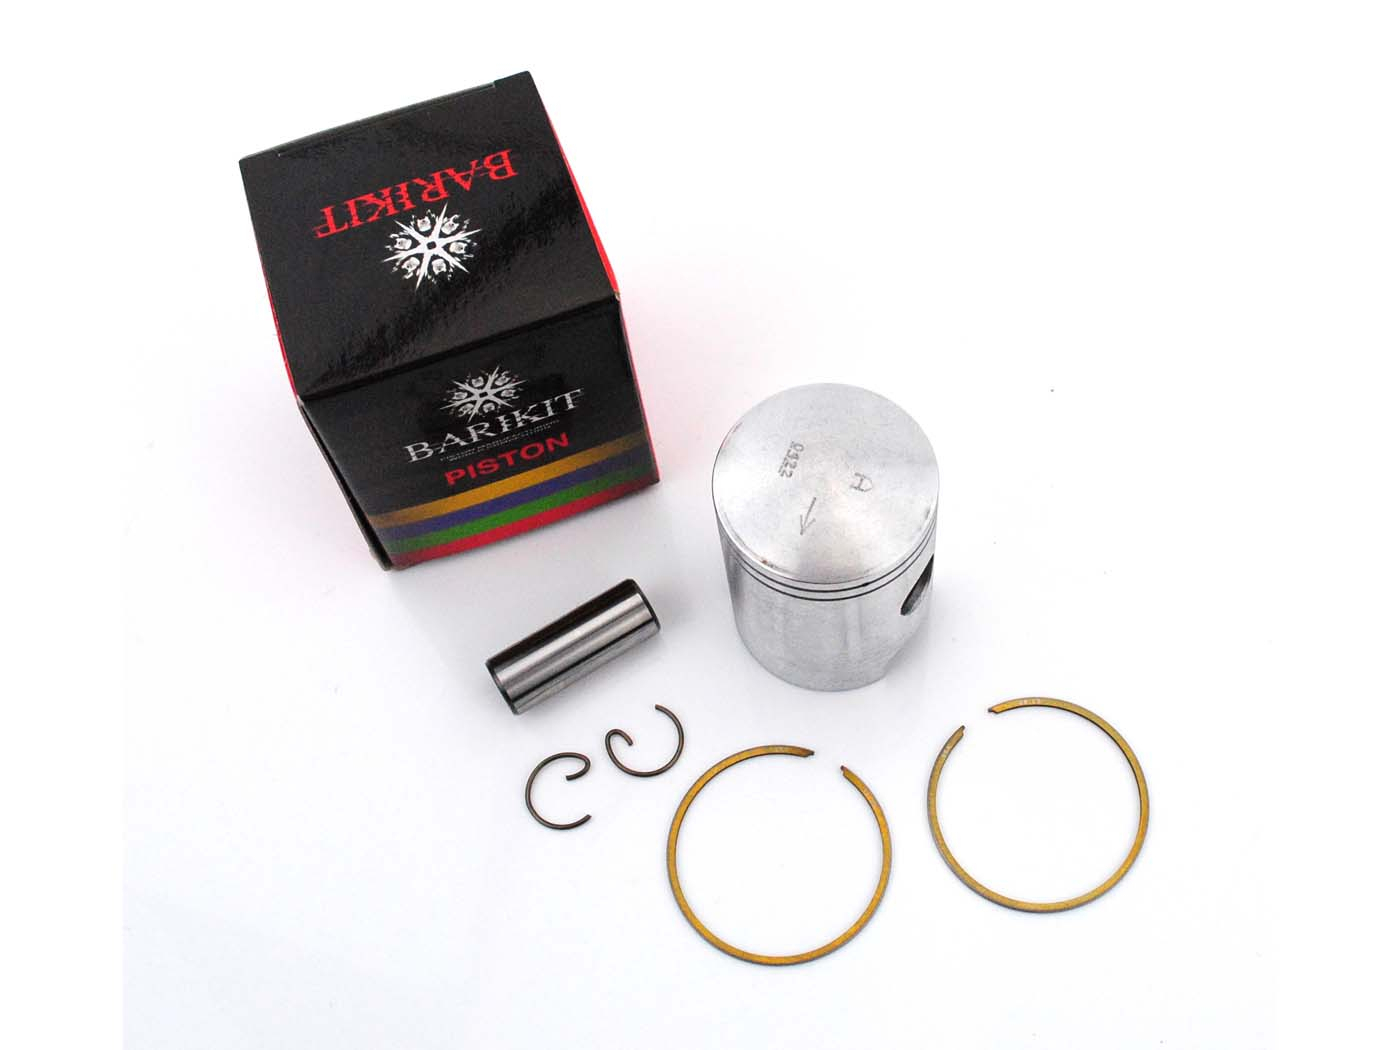 Piston Tuning Barikit Size C 38.25mm Piston Pin 12mm For Puch Maxi N S Moped Moped